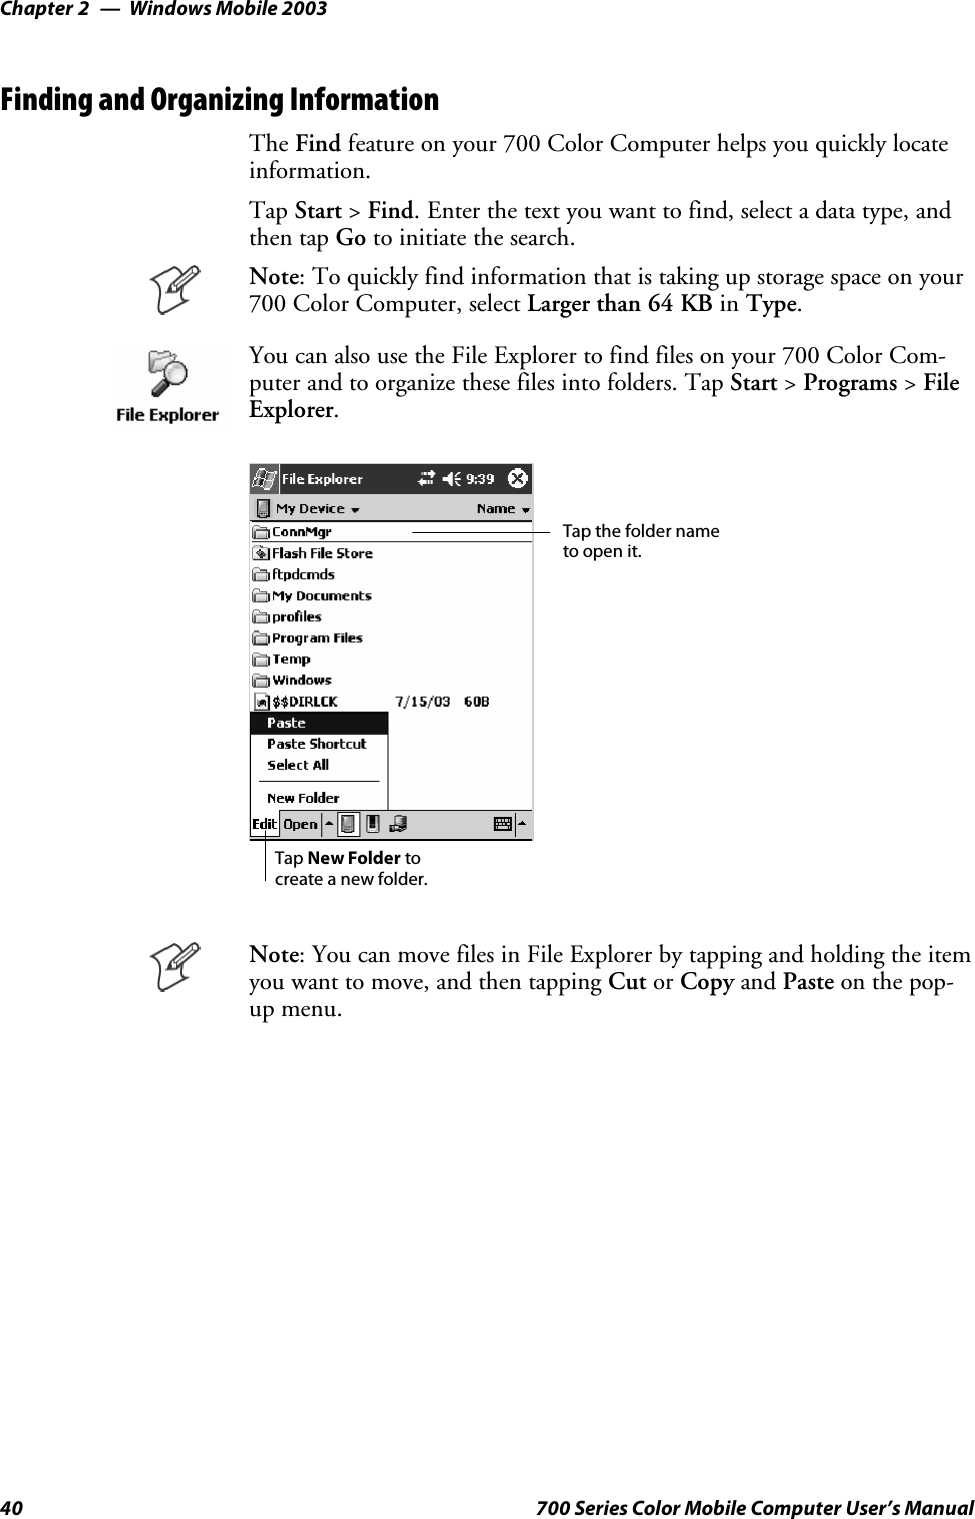 Windows Mobile 2003Chapter —240 700 Series Color Mobile Computer User’s ManualFinding and Organizing InformationThe Find feature on your 700 Color Computer helps you quickly locateinformation.Tap Start &gt;Find. Enter the text you want to find, select a data type, andthen tap Go to initiate the search.Note: To quickly find information that is taking up storage space on your700 Color Computer, select Larger than 64 KB in Type.You can also use the File Explorer to find files on your 700 Color Com-puter and to organize these files into folders. Tap Start &gt;Programs &gt;FileExplorer.Tap the folder nameto open it.Tap New Folder tocreate a new folder.Note: You can move files in File Explorer by tapping and holding the itemyou want to move, and then tapping Cut or Copy and Paste on the pop-up menu.